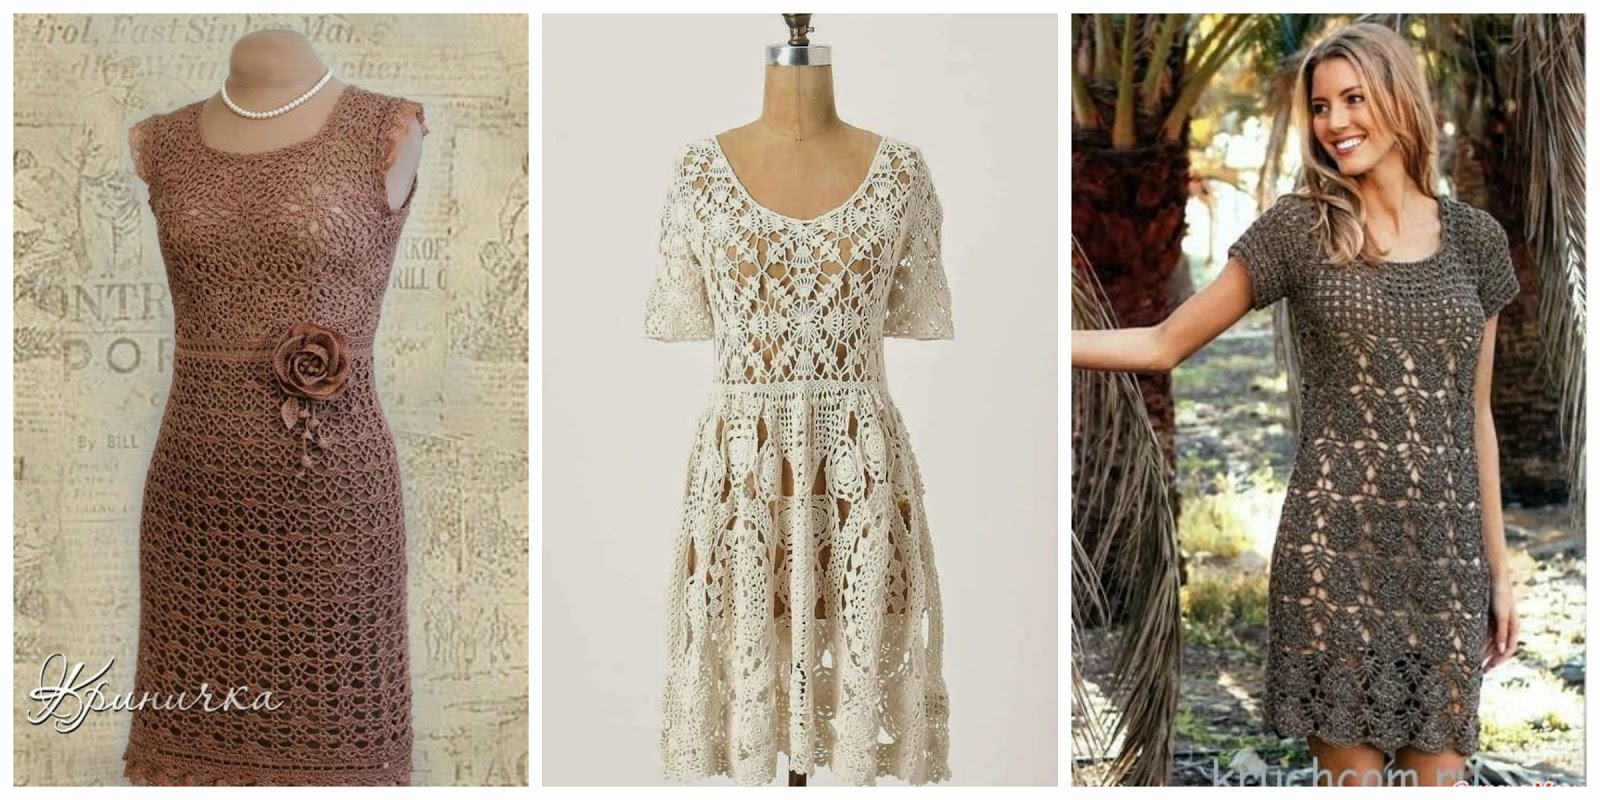 Crochet Dress Pattern Free Add Spice To Your Wardrobe With Crochet Dress Patterns Crochet And